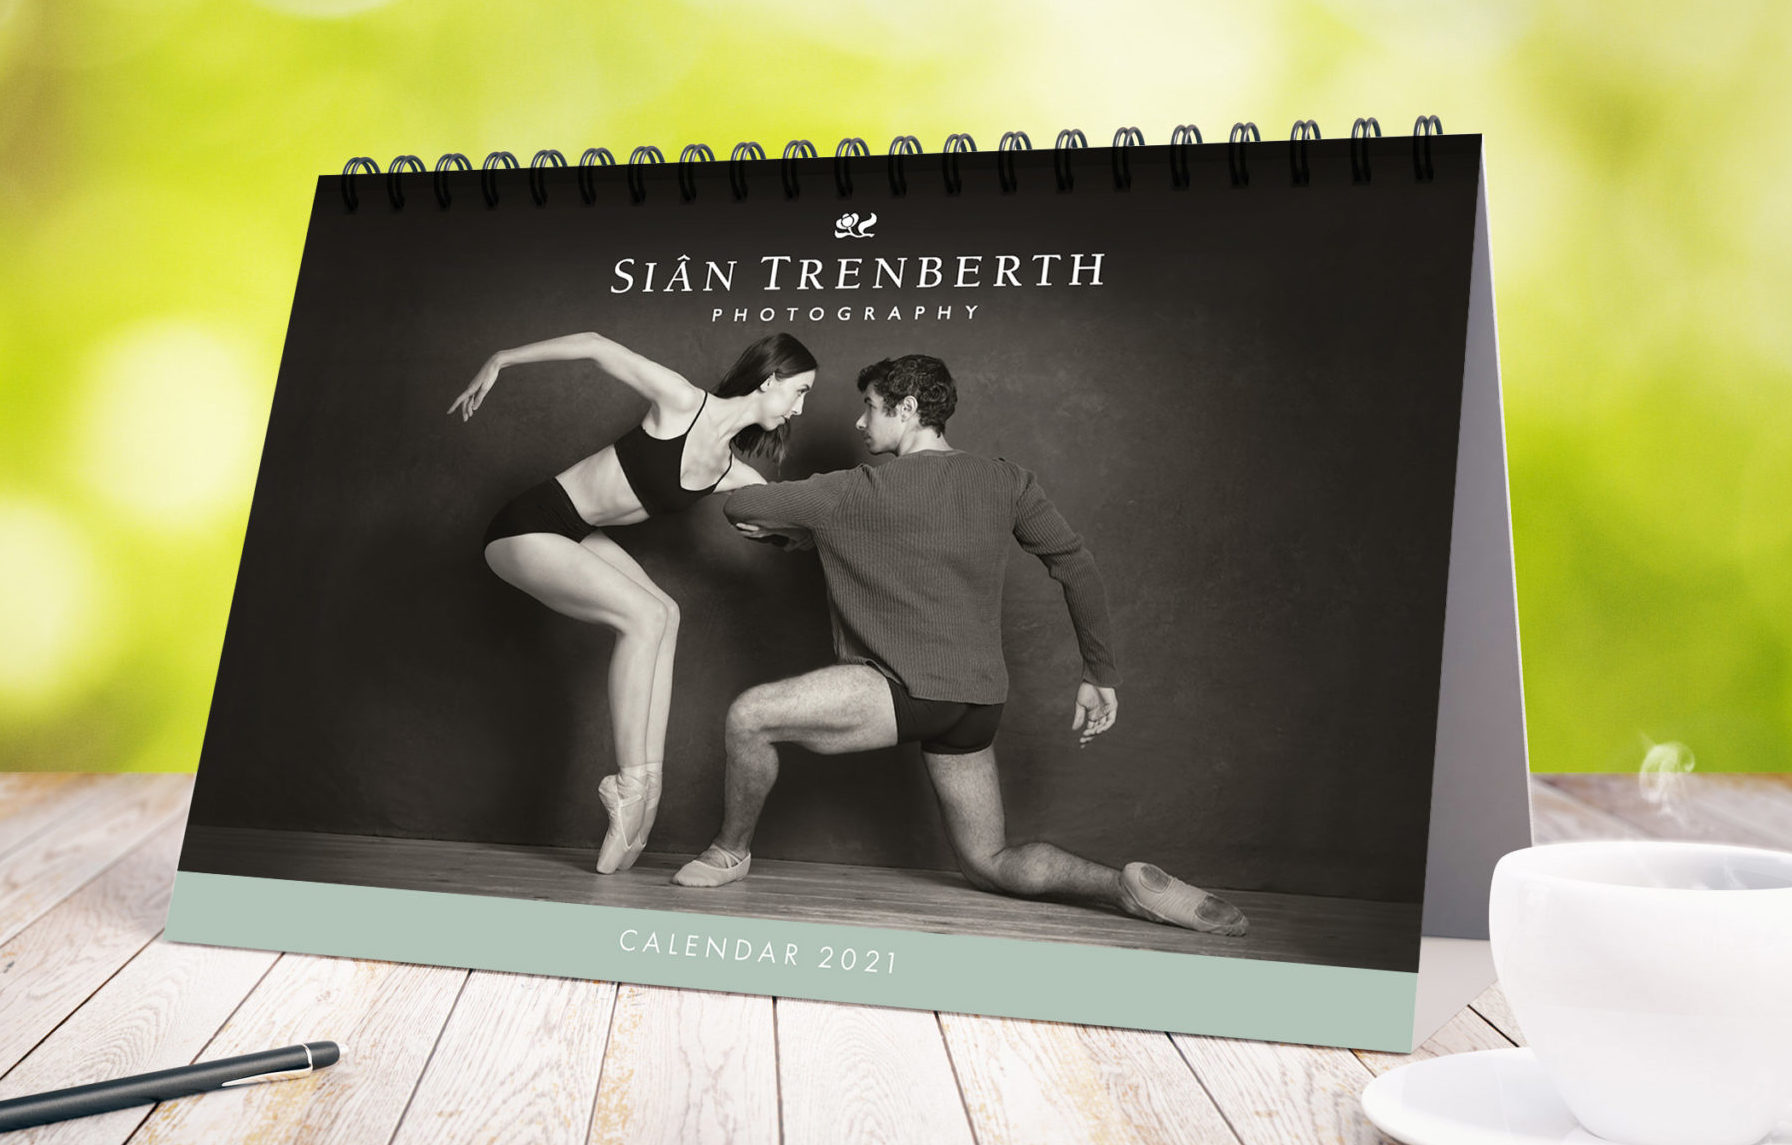 Calendar design and printing for Cardiff photographer